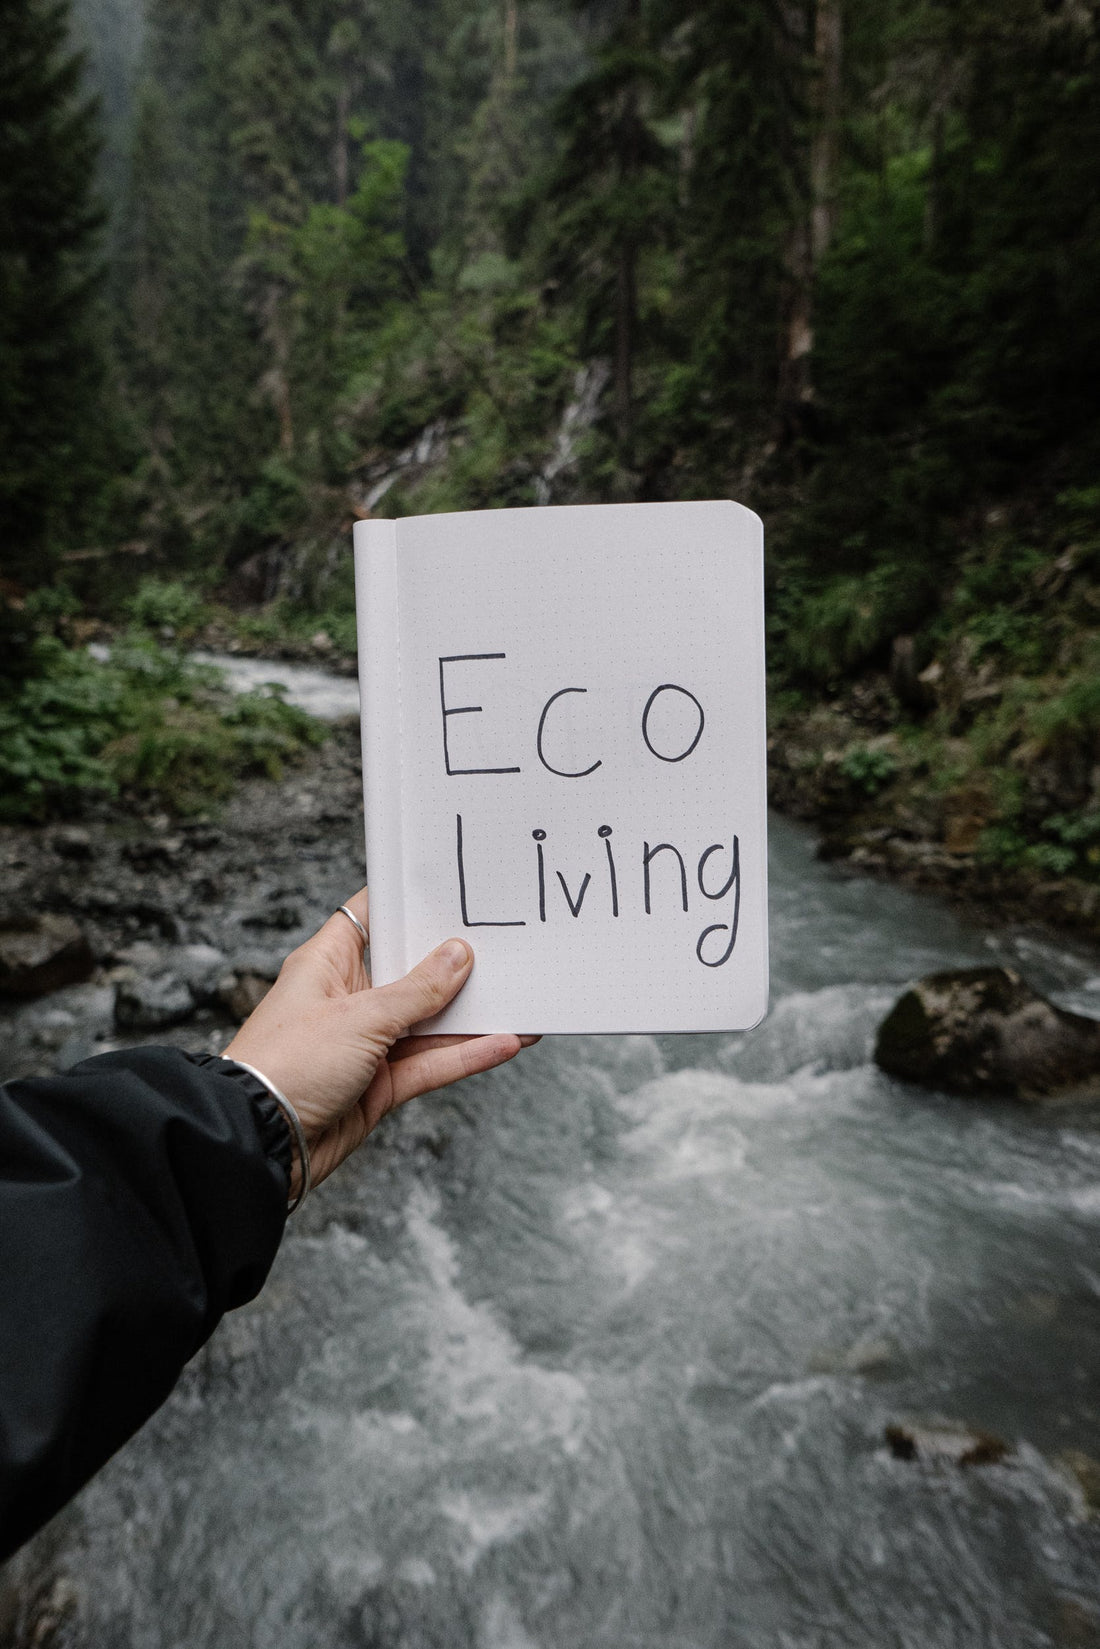 7 Eco-Friendly Ways to Save the World and Make an Impact